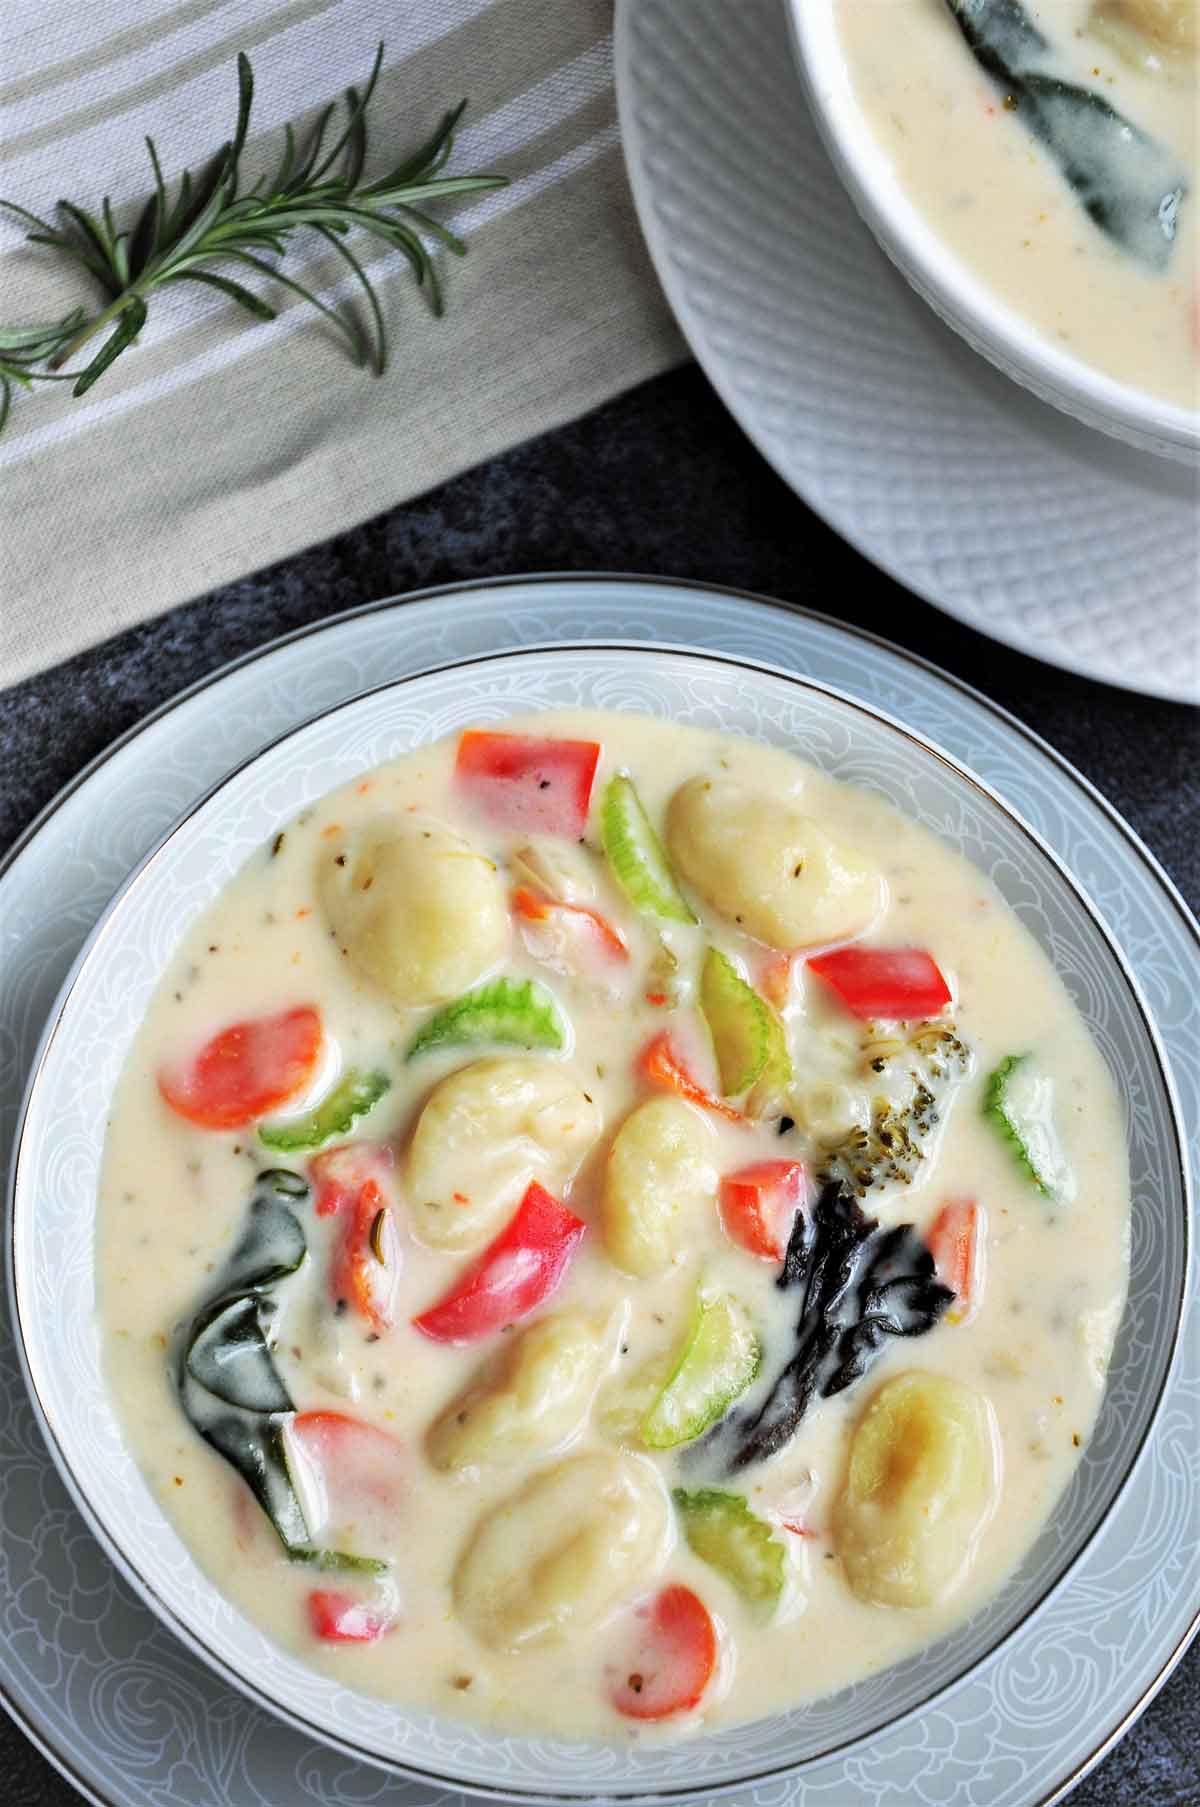 Gnocchi soup with vegetables served in a bowl.